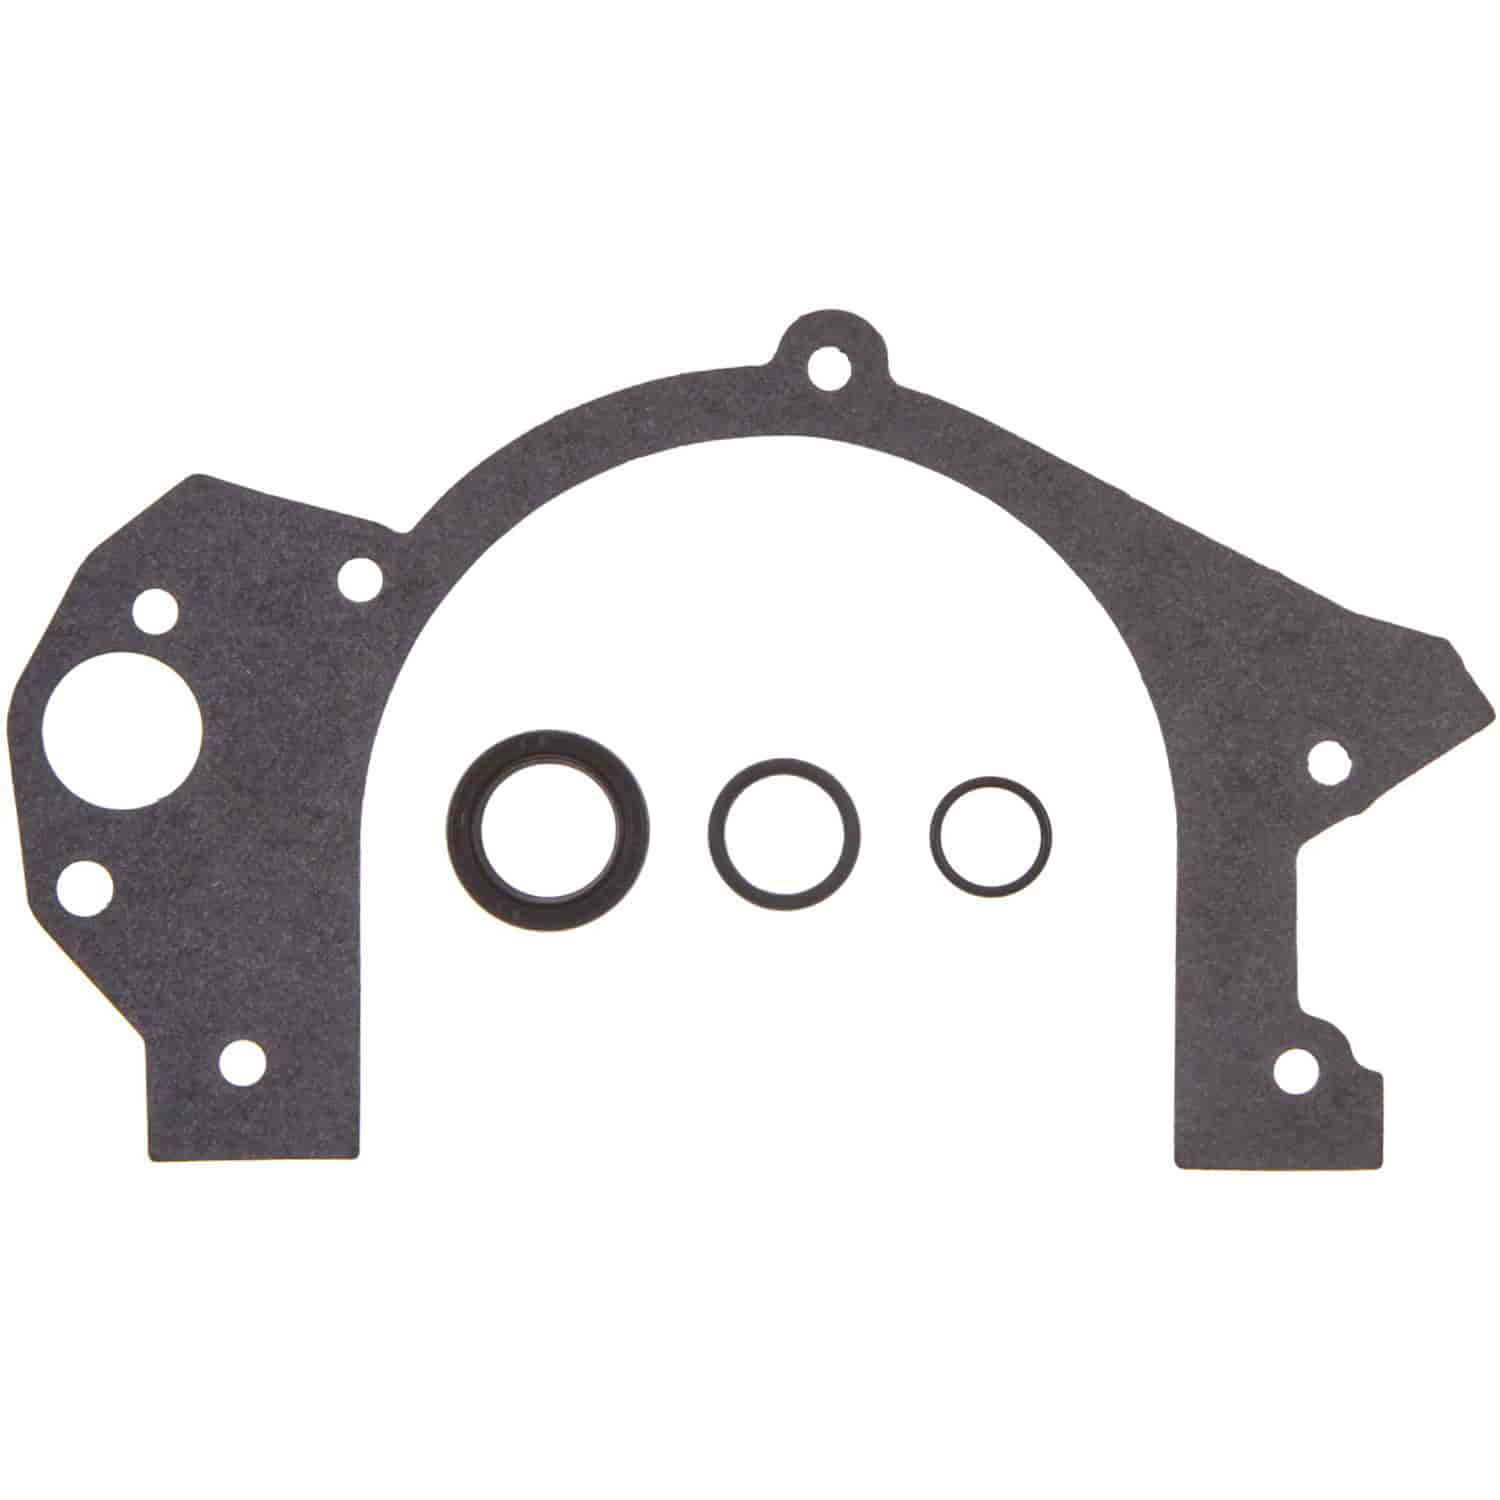 Timing Cover Set Chry-Pass 215 3.5L Eng. 1993-96